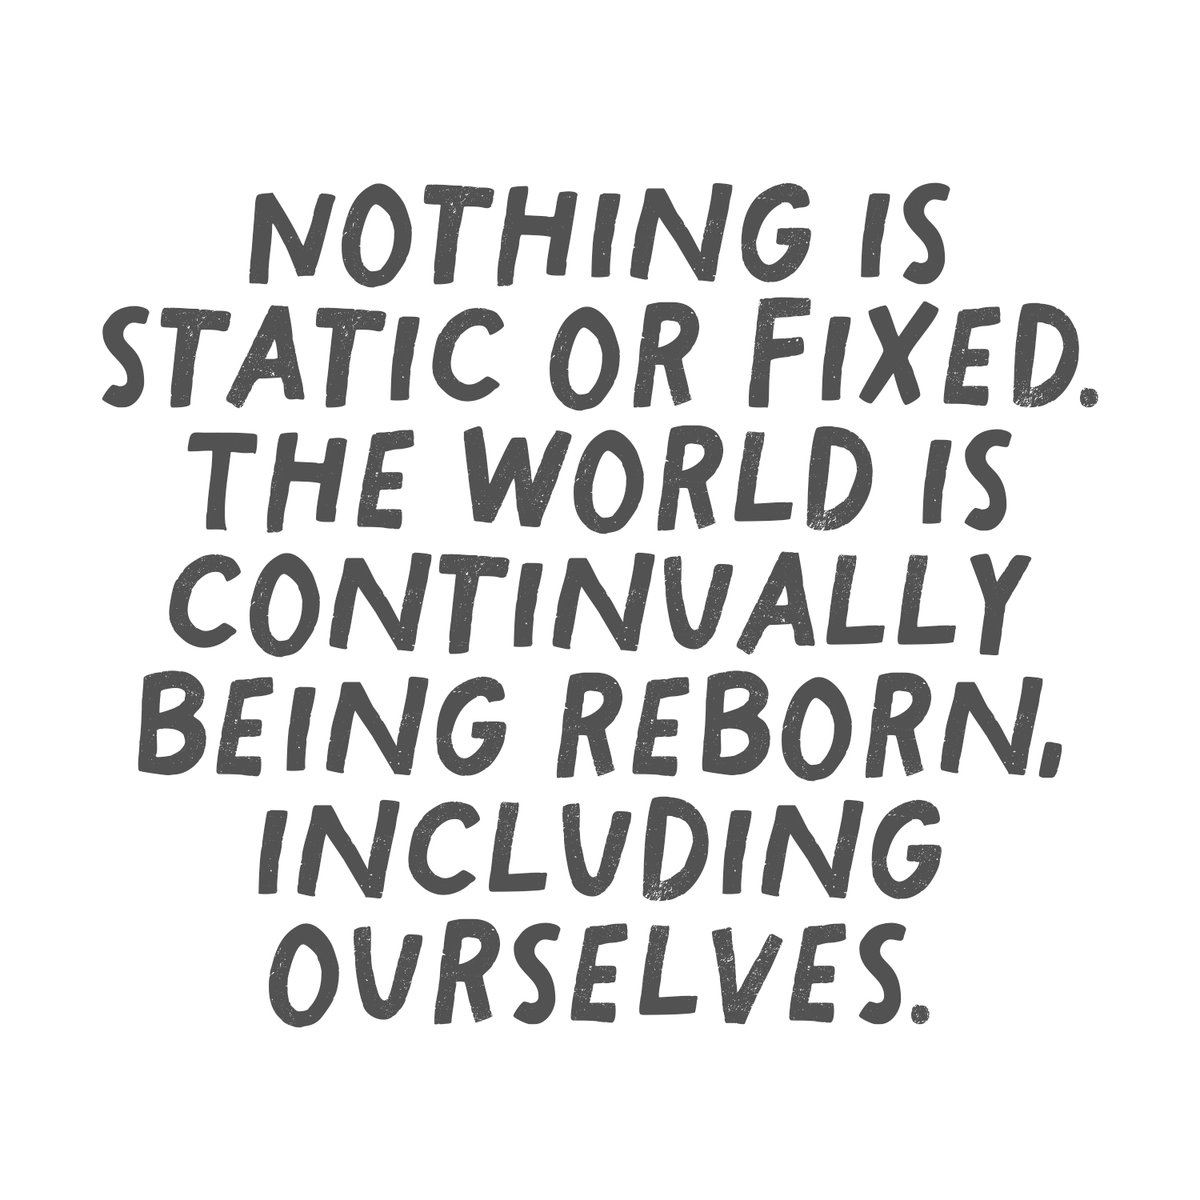 Nothing is static or fixed. The world is continually being reborn.